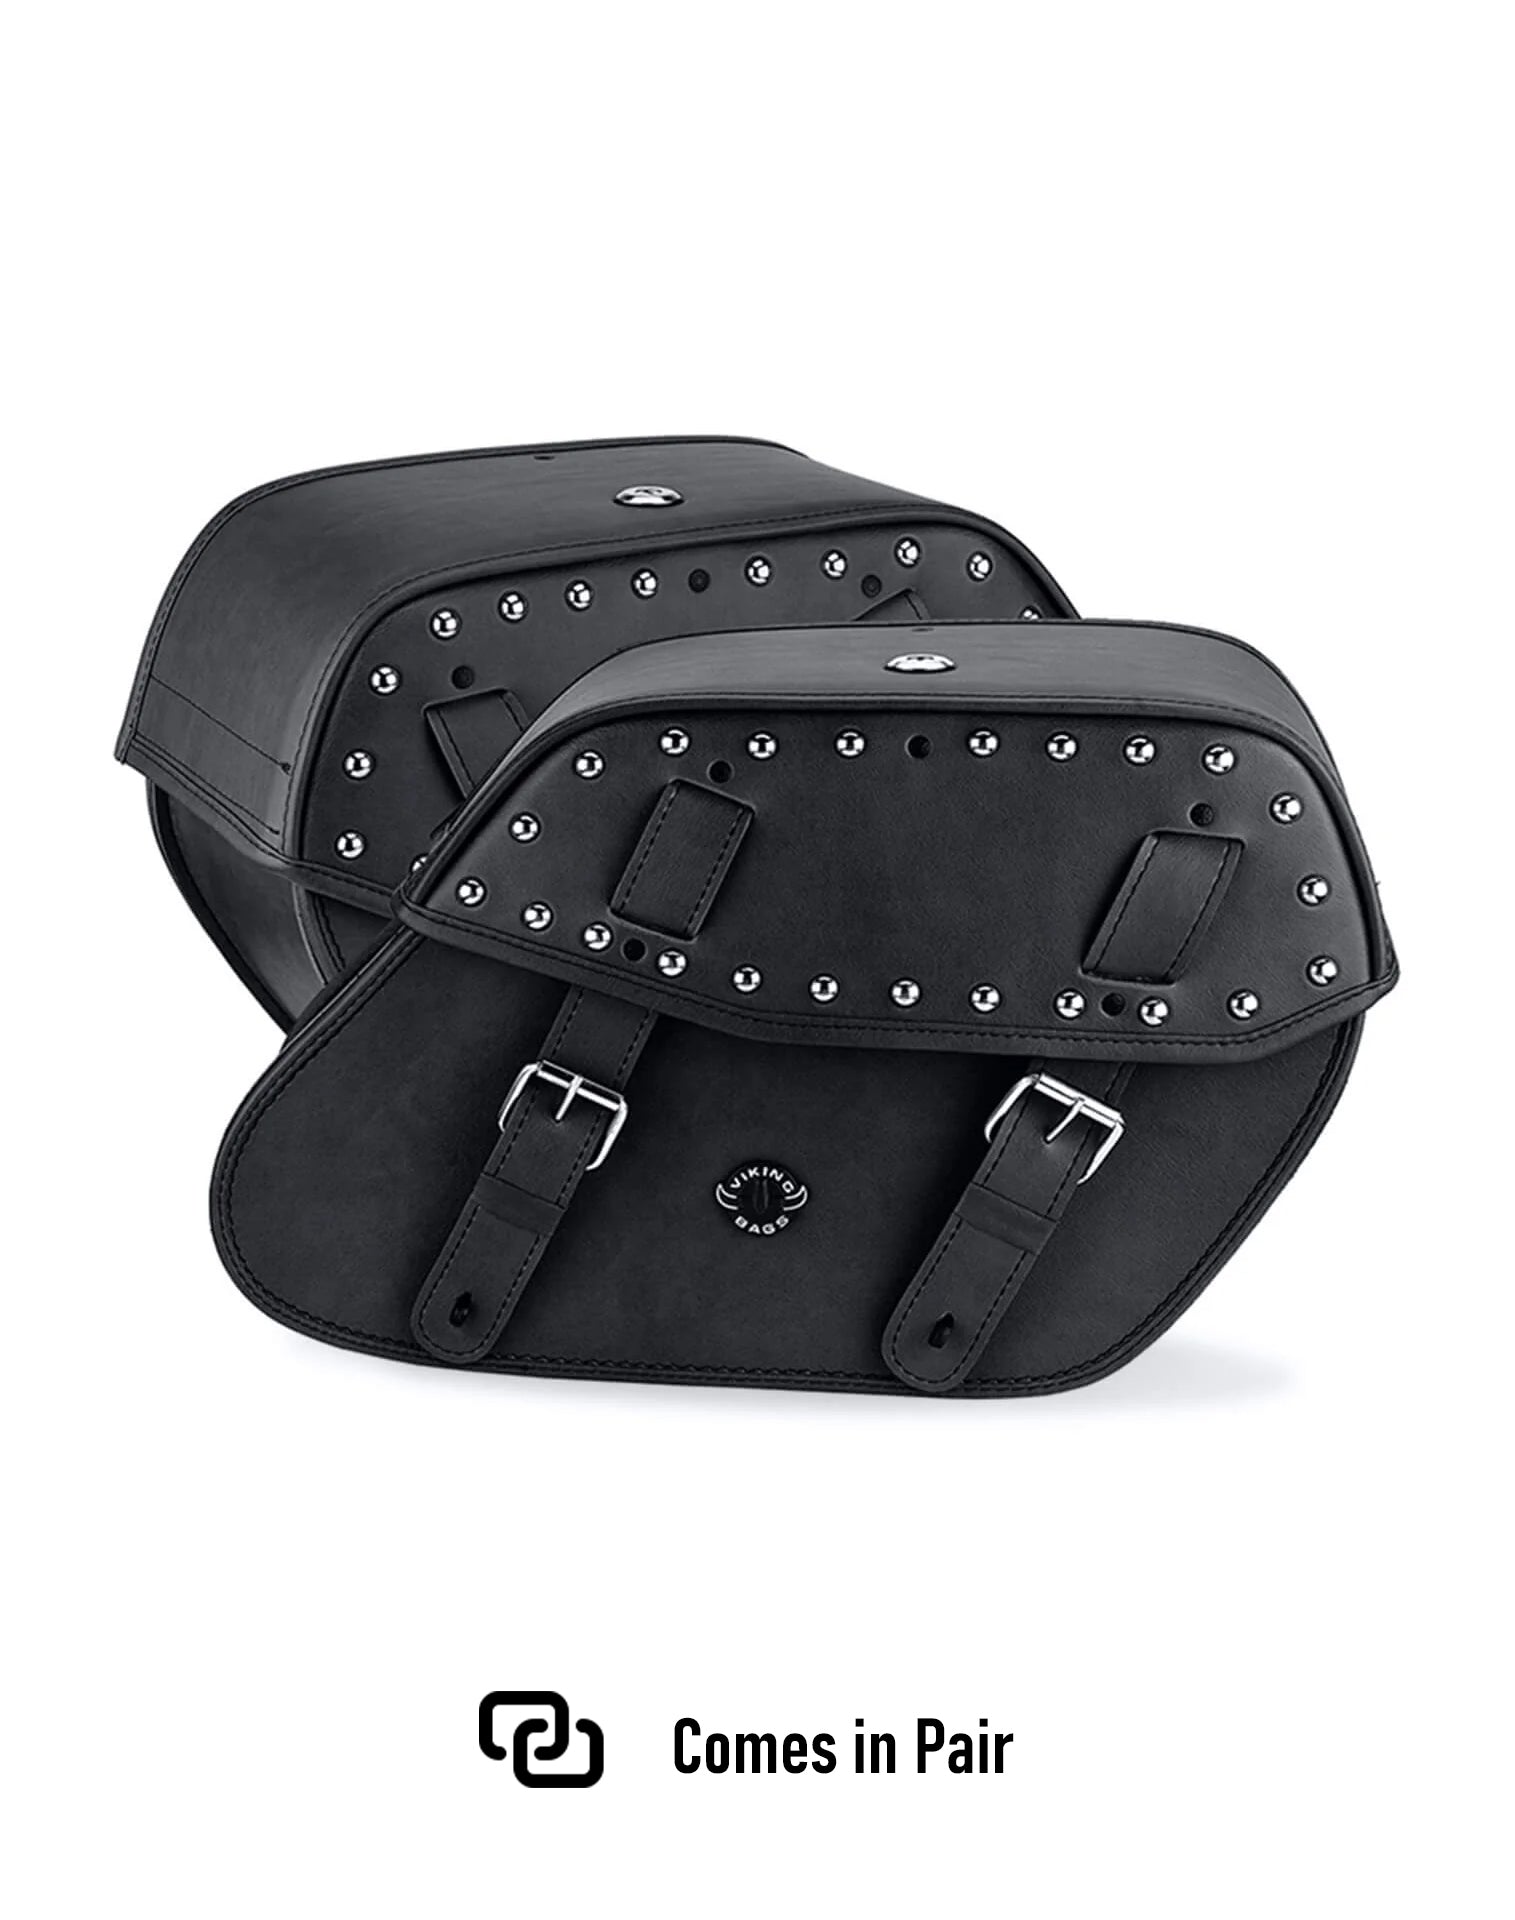 Viking Odin Large Kawasaki Vulcan 2000 Vn2000 Studded Leather Motorcycle Saddlebags Weather Resistant Bags Comes in Pair